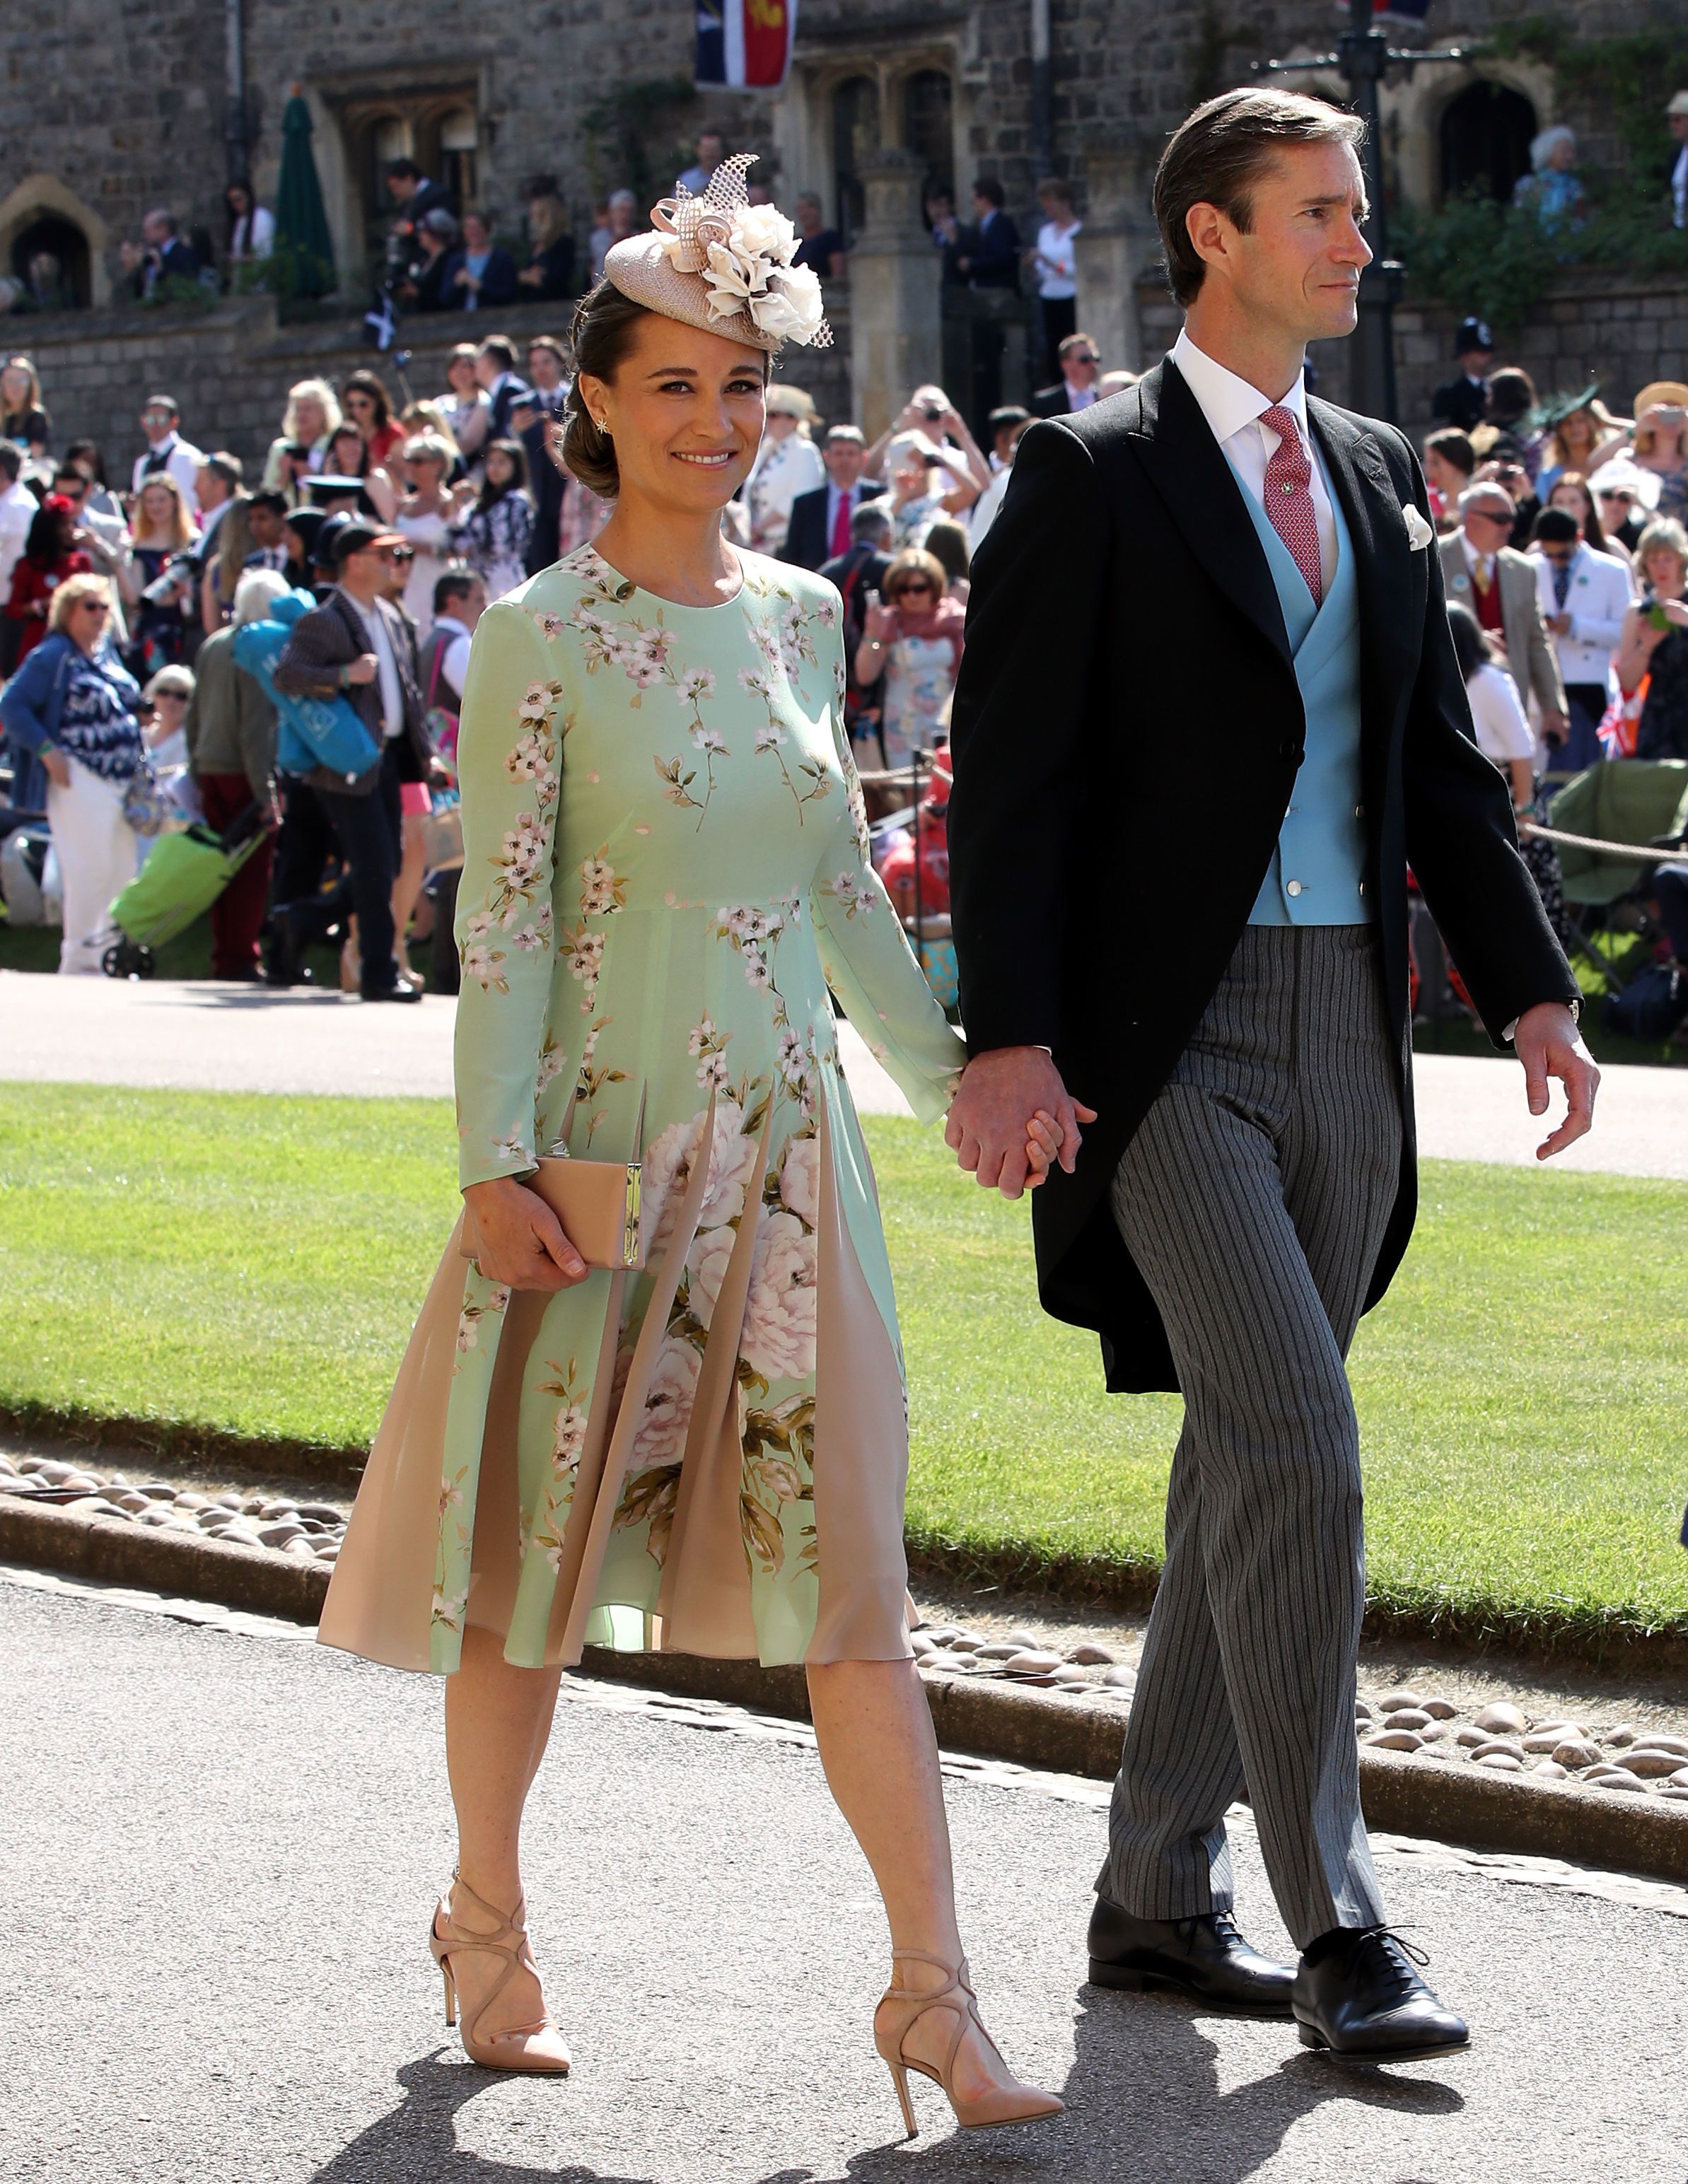 Pippa Middleton's Royal Wedding outfit has divided Twitter - People compare Pippa  Middleton to can of iced tea